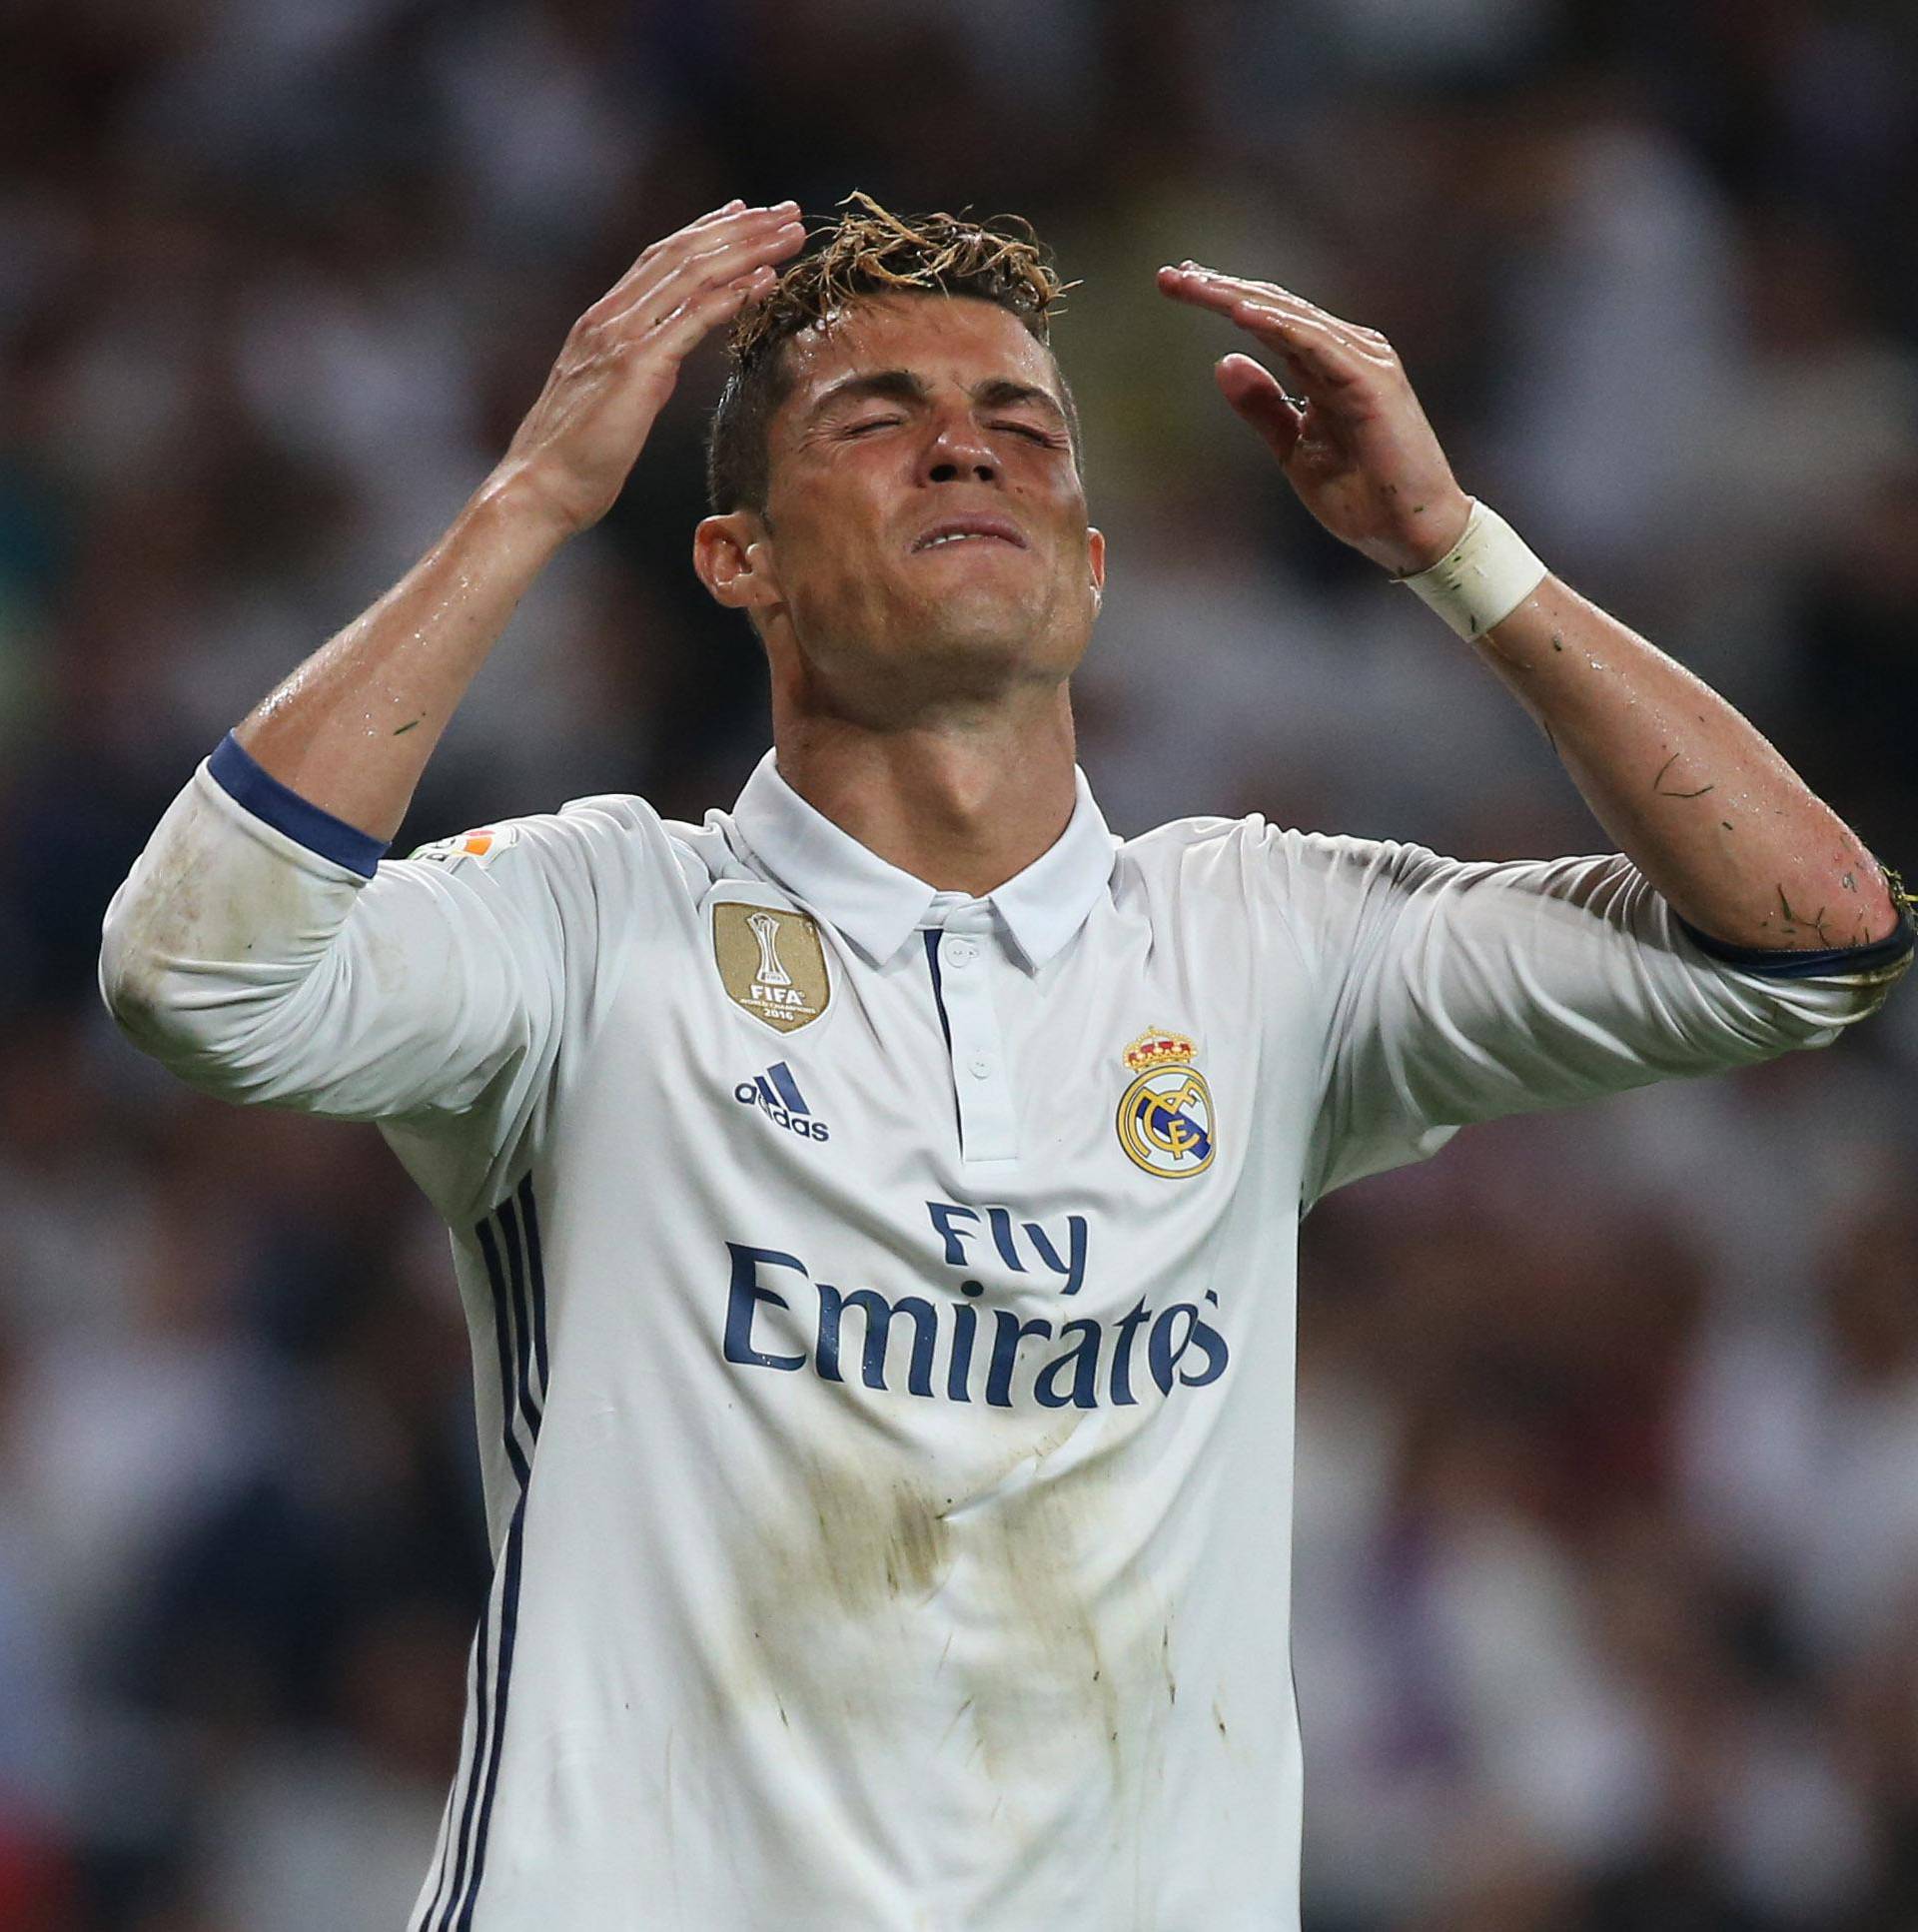 Real Madrid's Cristiano Ronaldo looks dejected after missing a chance to score